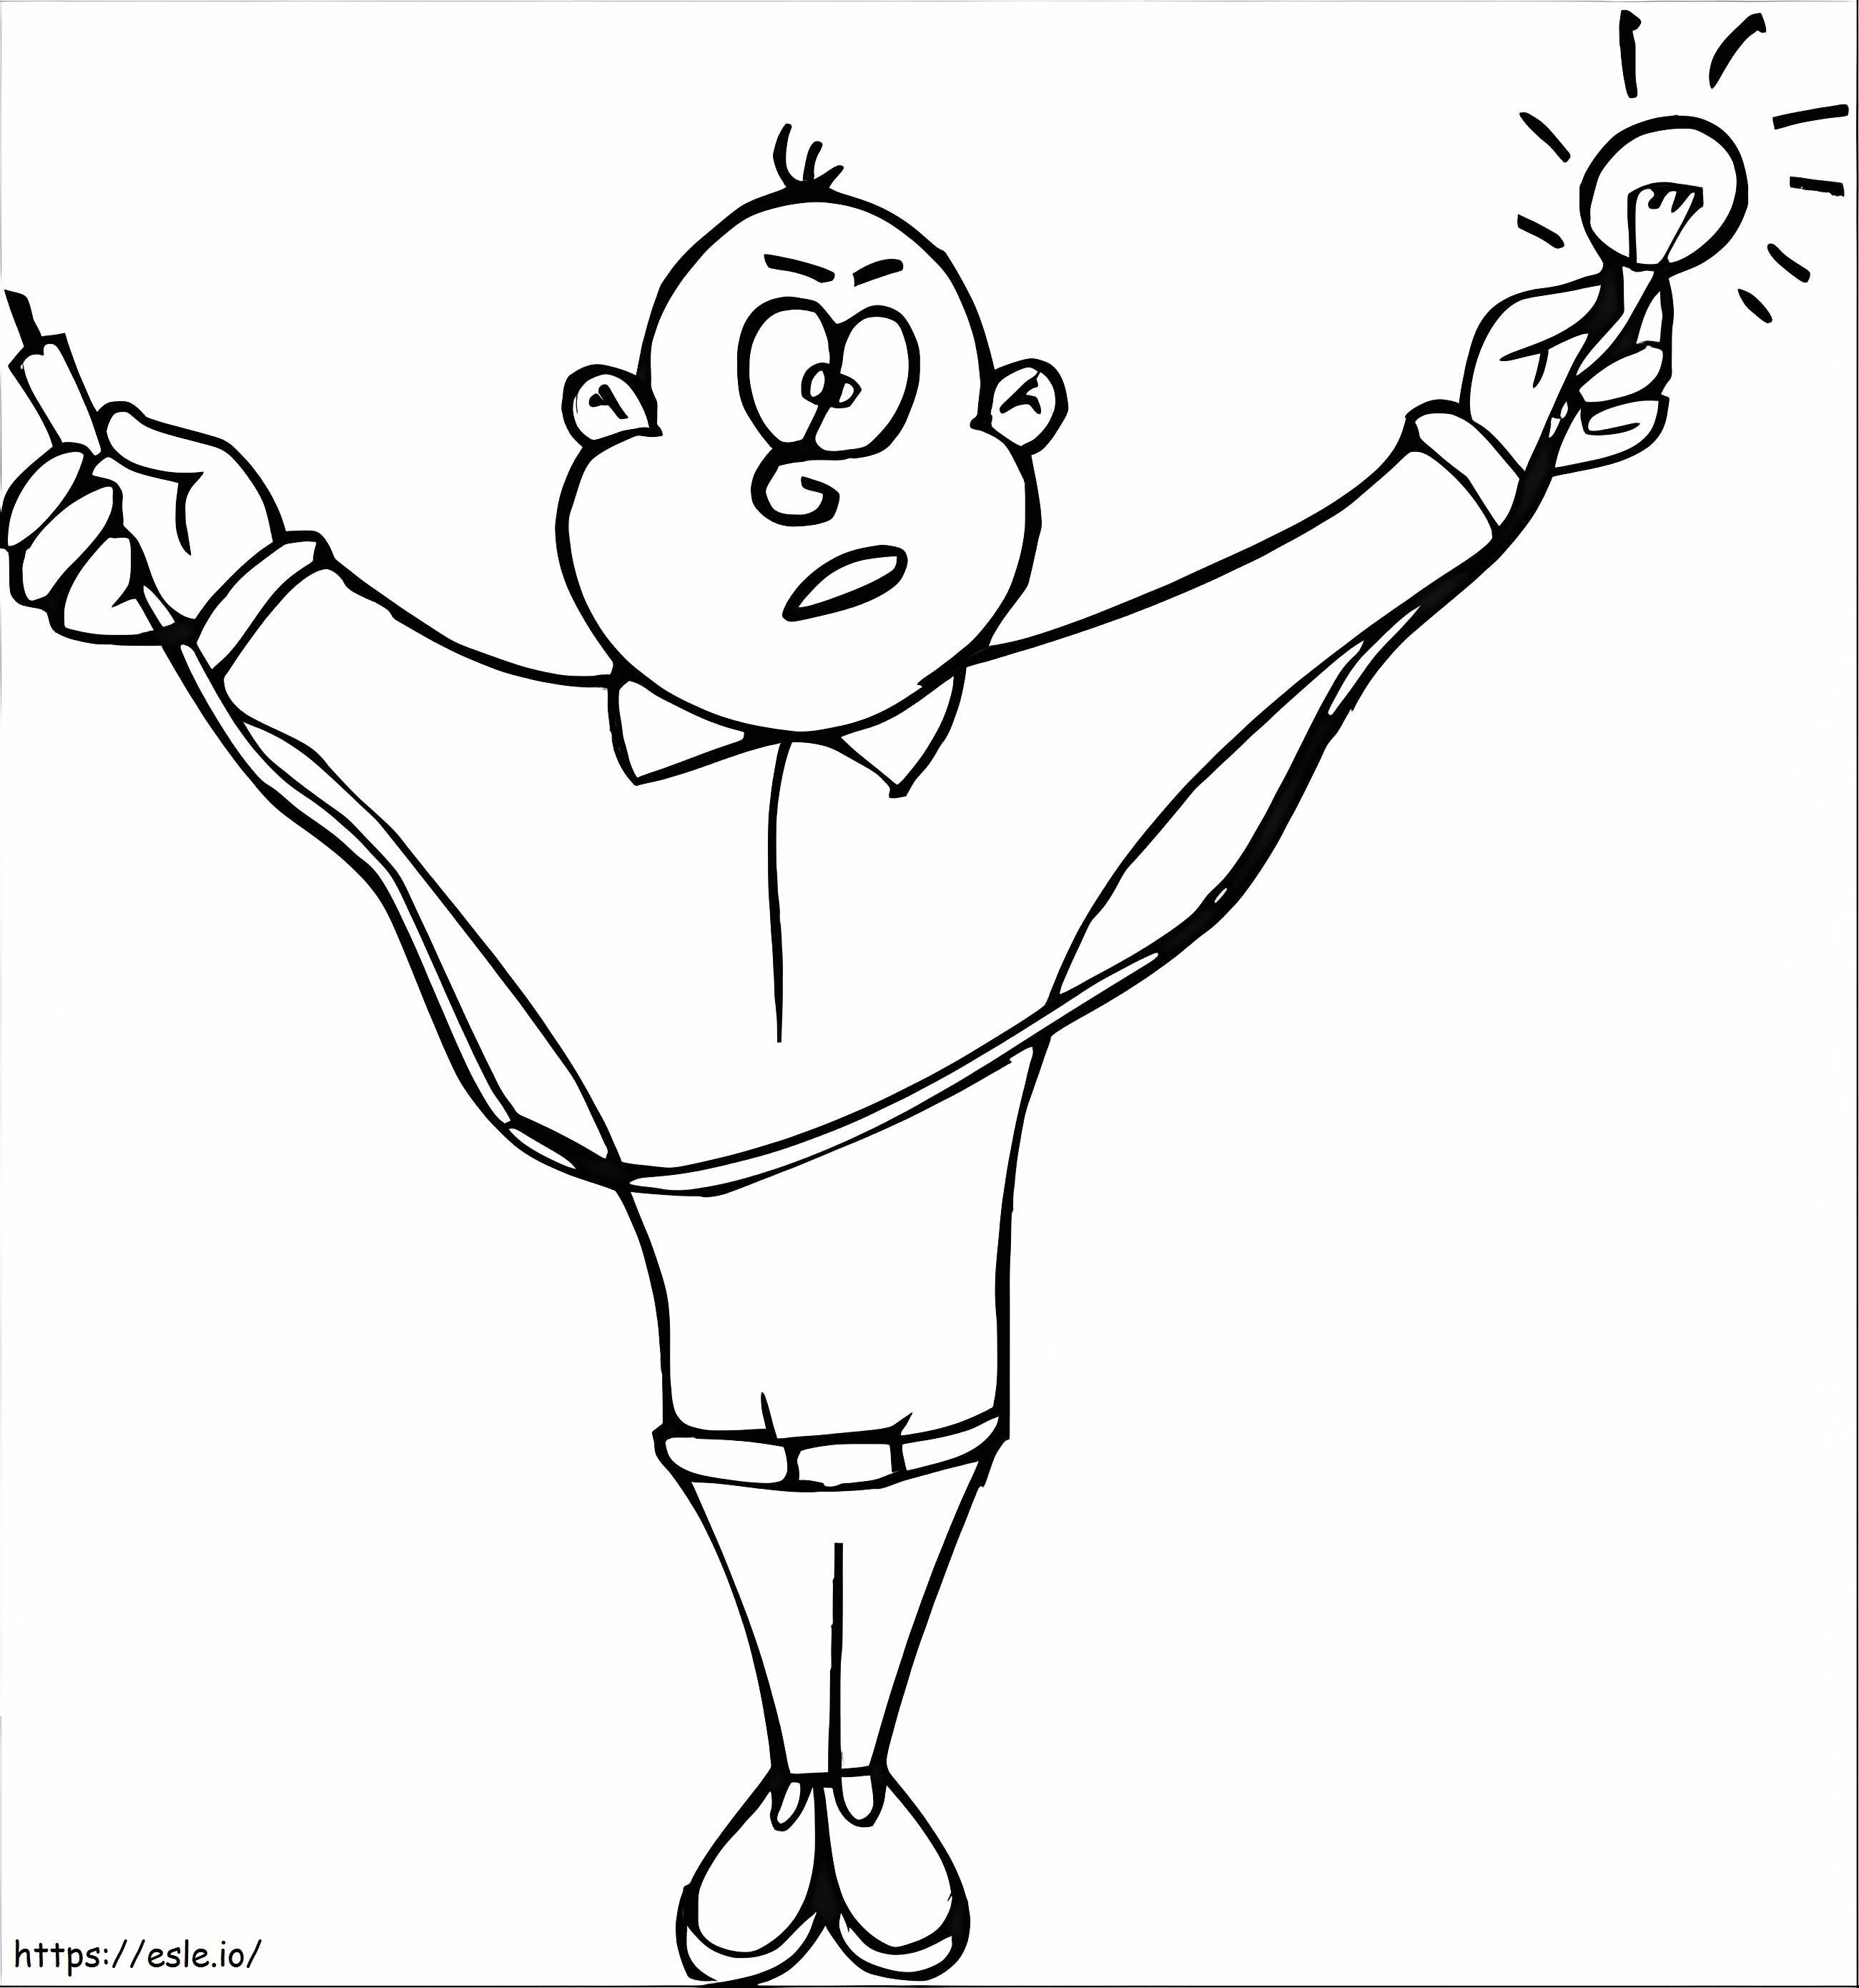 Electrician With Lamp coloring page